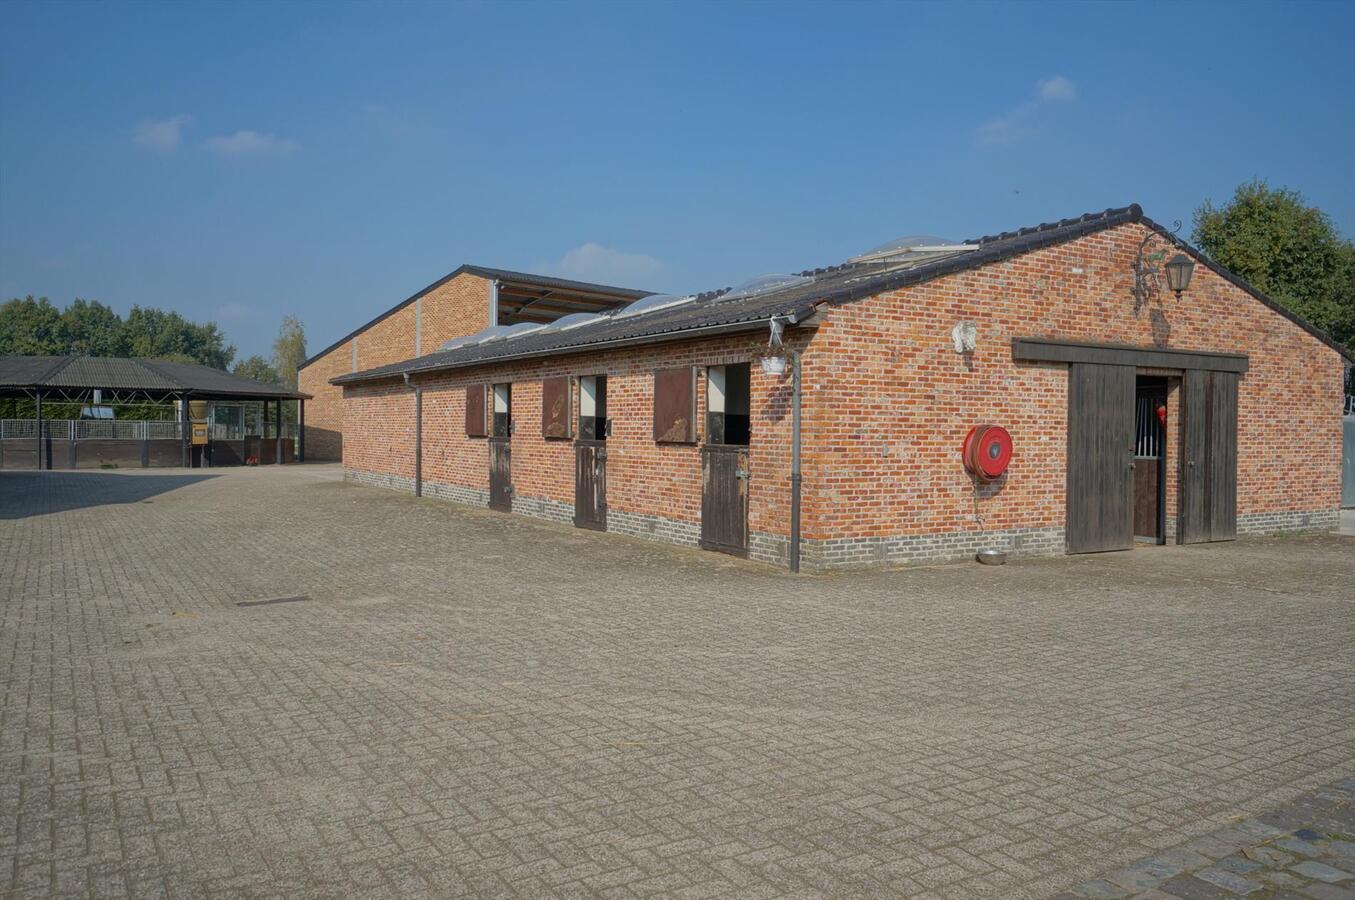 Property sold in Westmalle